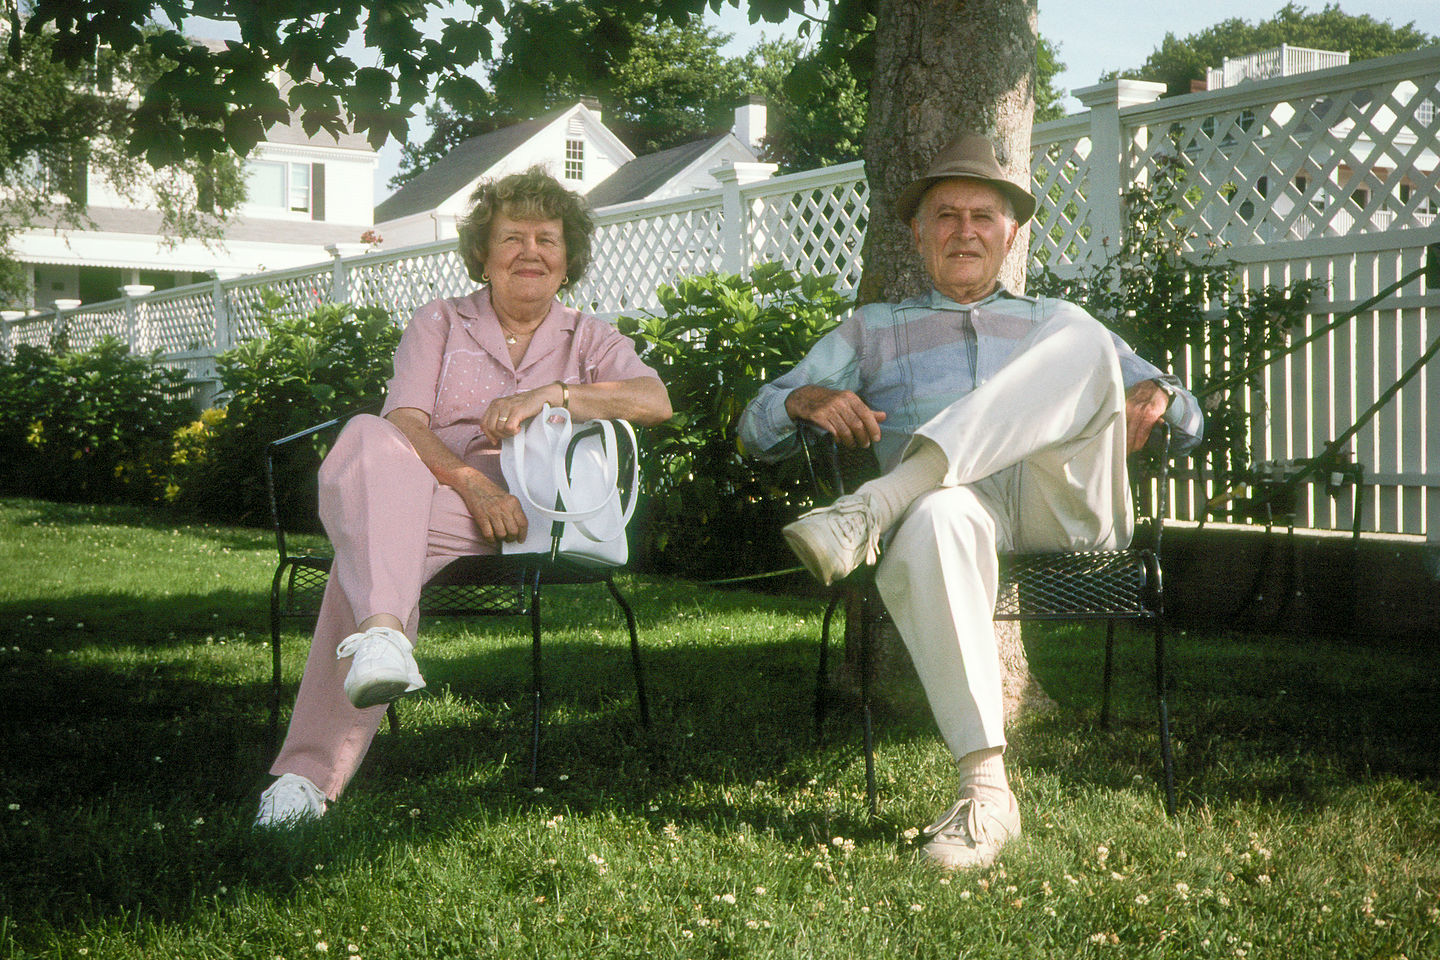 Hedy and Al on Lawn of Daggett House